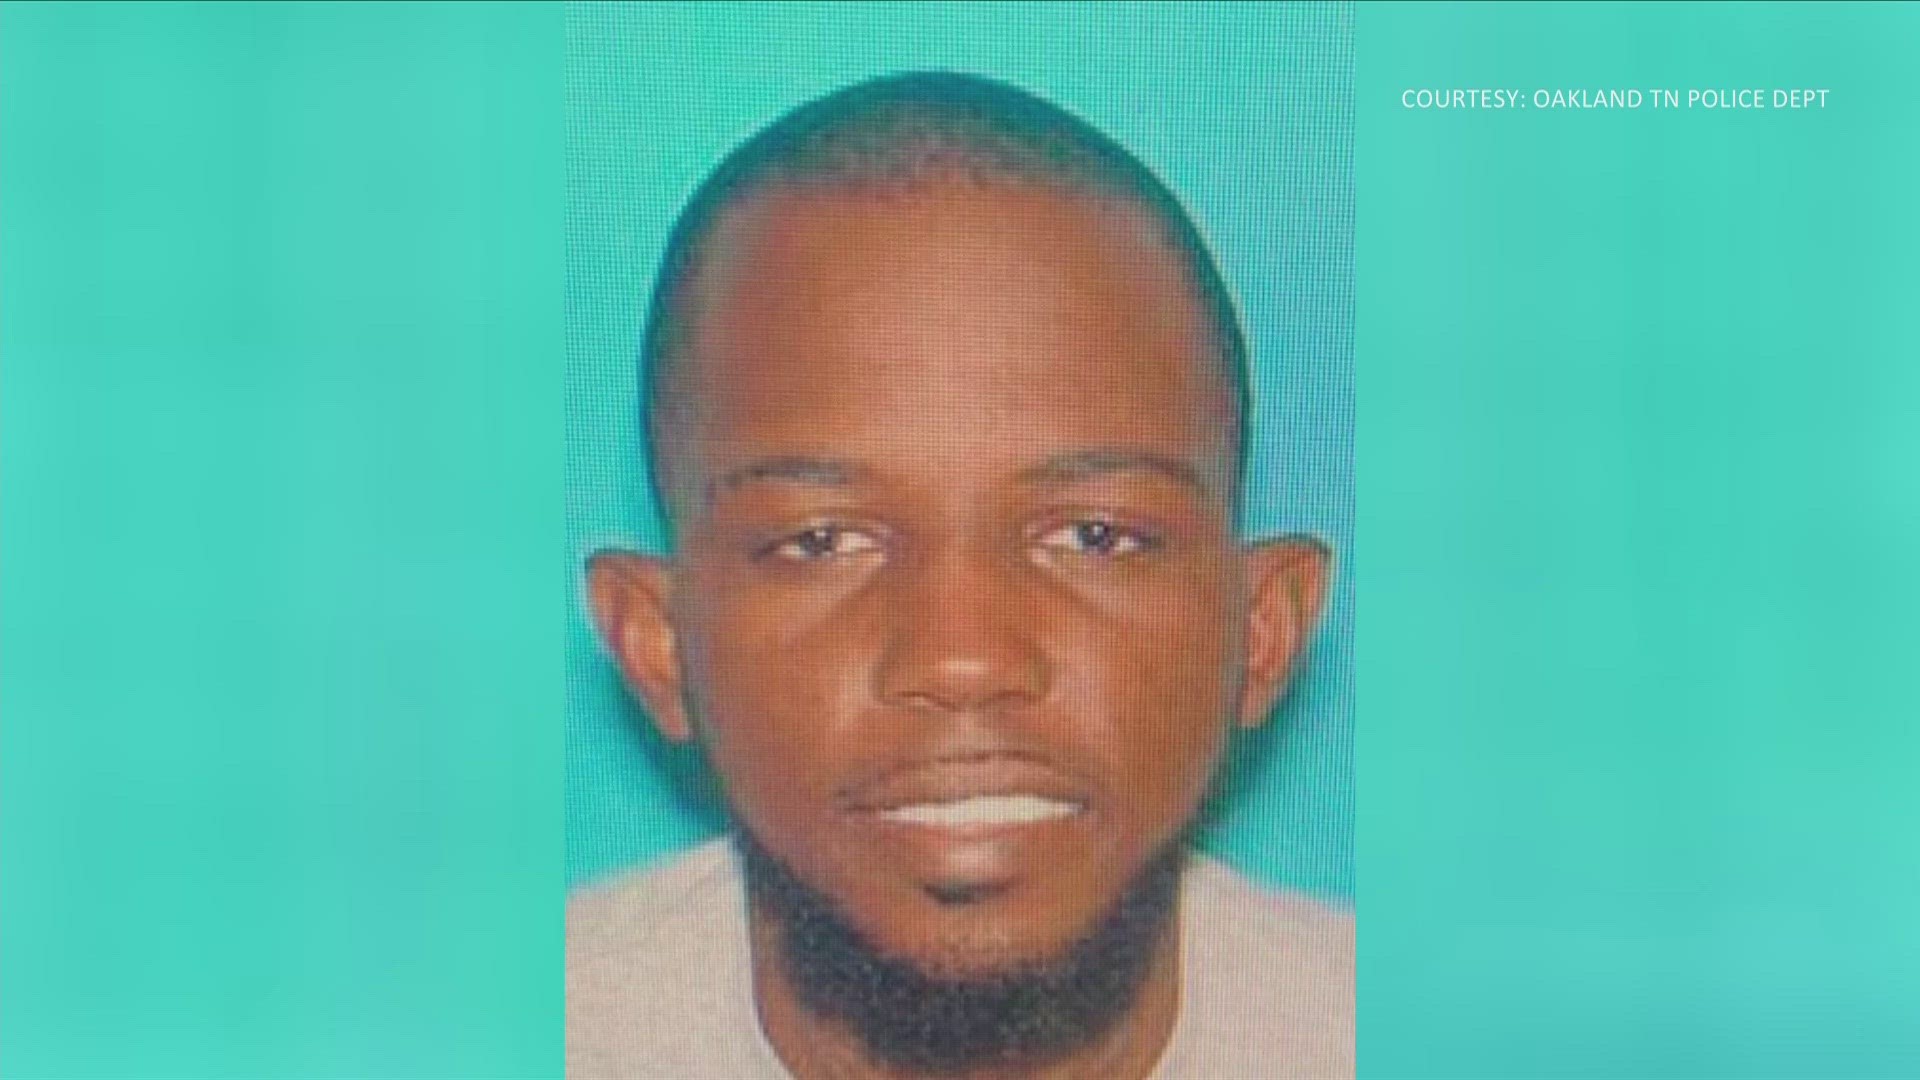 Police in Oakland, Tennessee, are warning people to be on the lookout for a robbery suspect they said should be considered “armed and dangerous.”